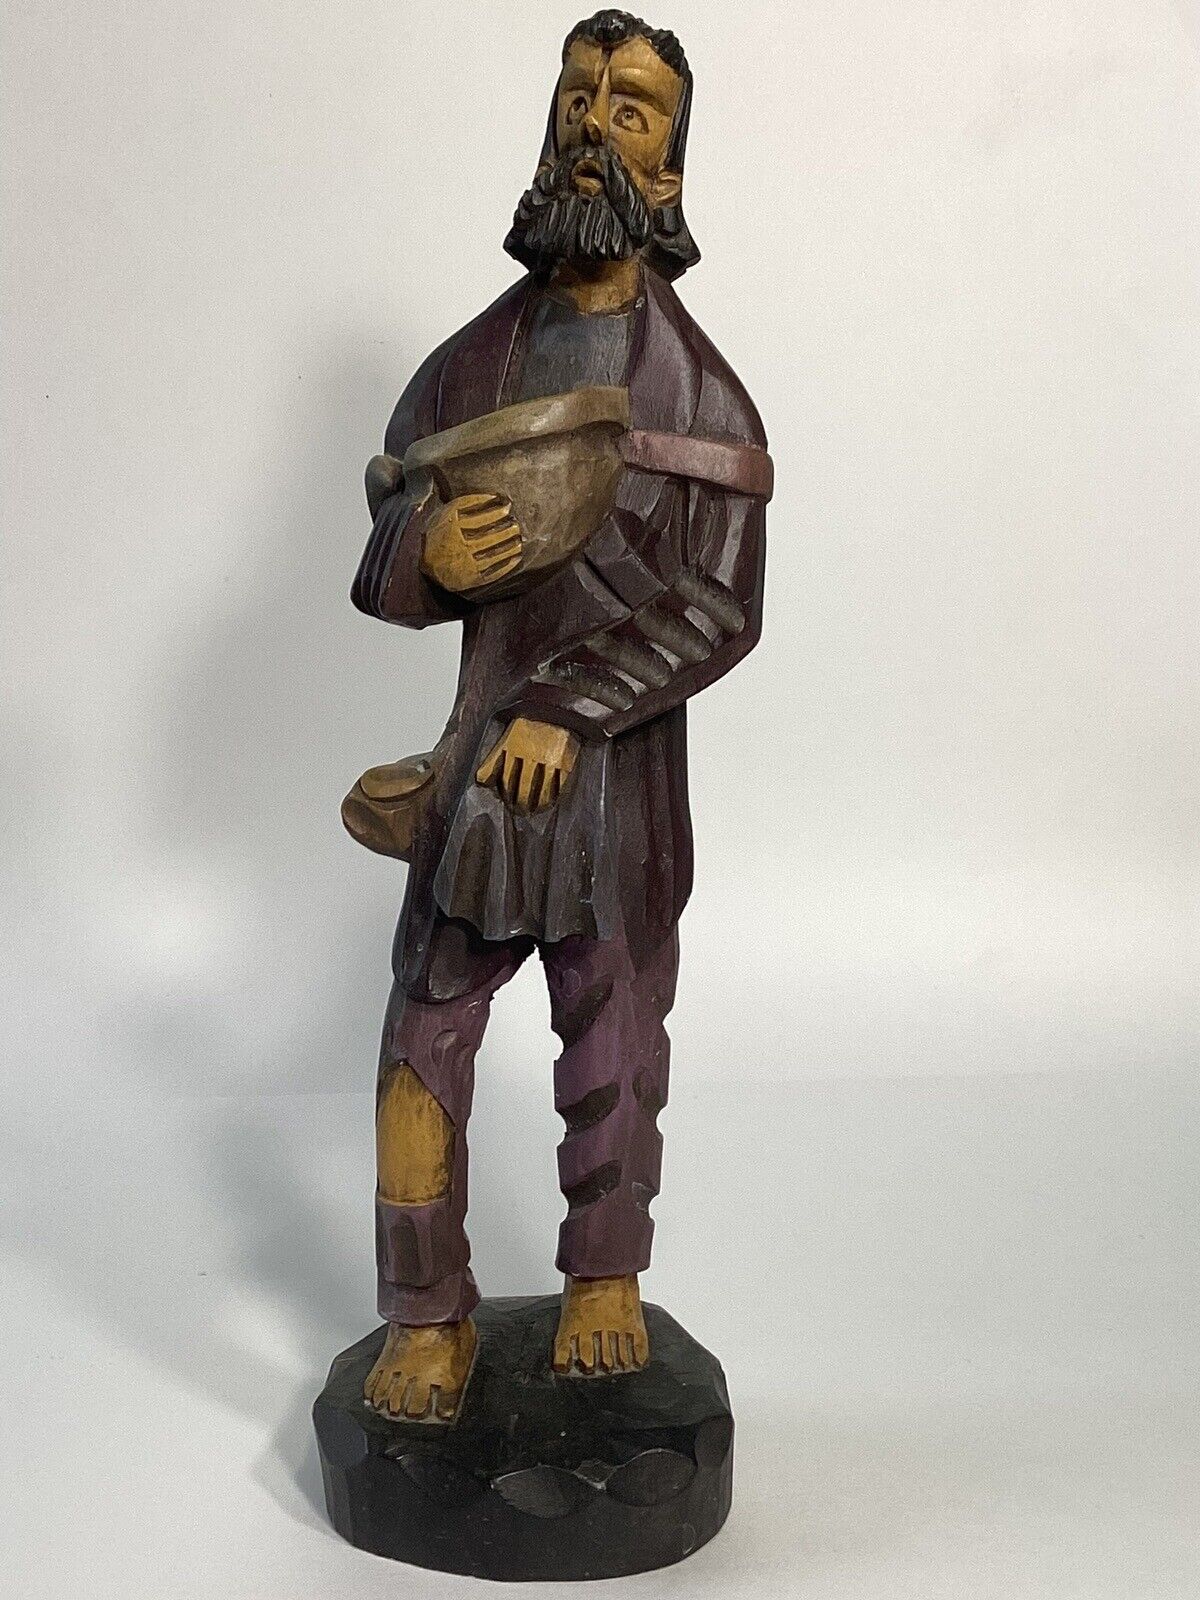 13” Hand Carved wood figure folk art Bearded man made in mexico